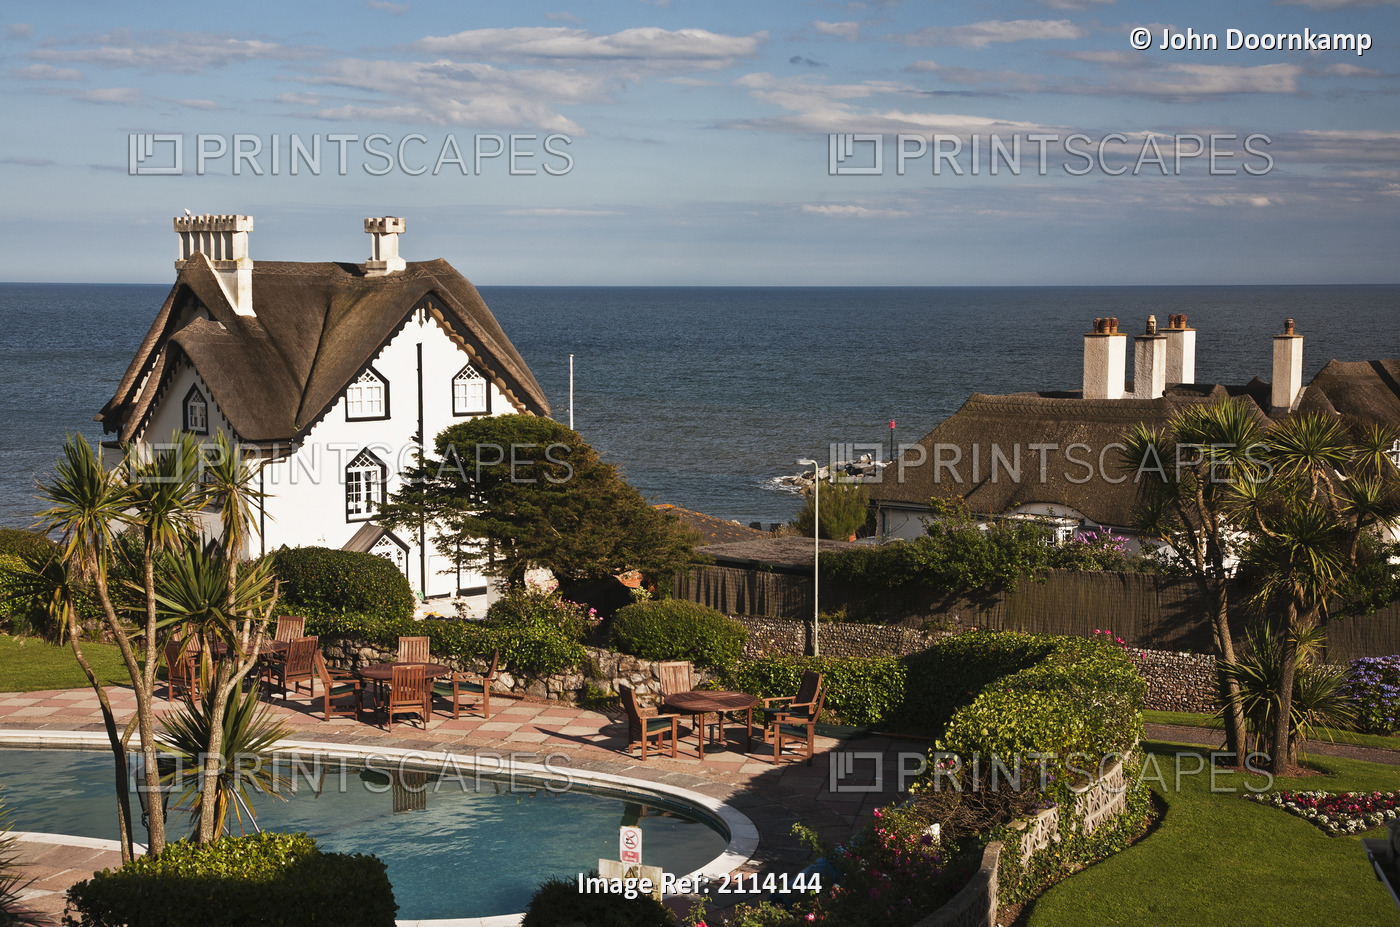 Thatched Cottages And A Swimming Pool Along The Ocean; Sidmouth, Devon, England